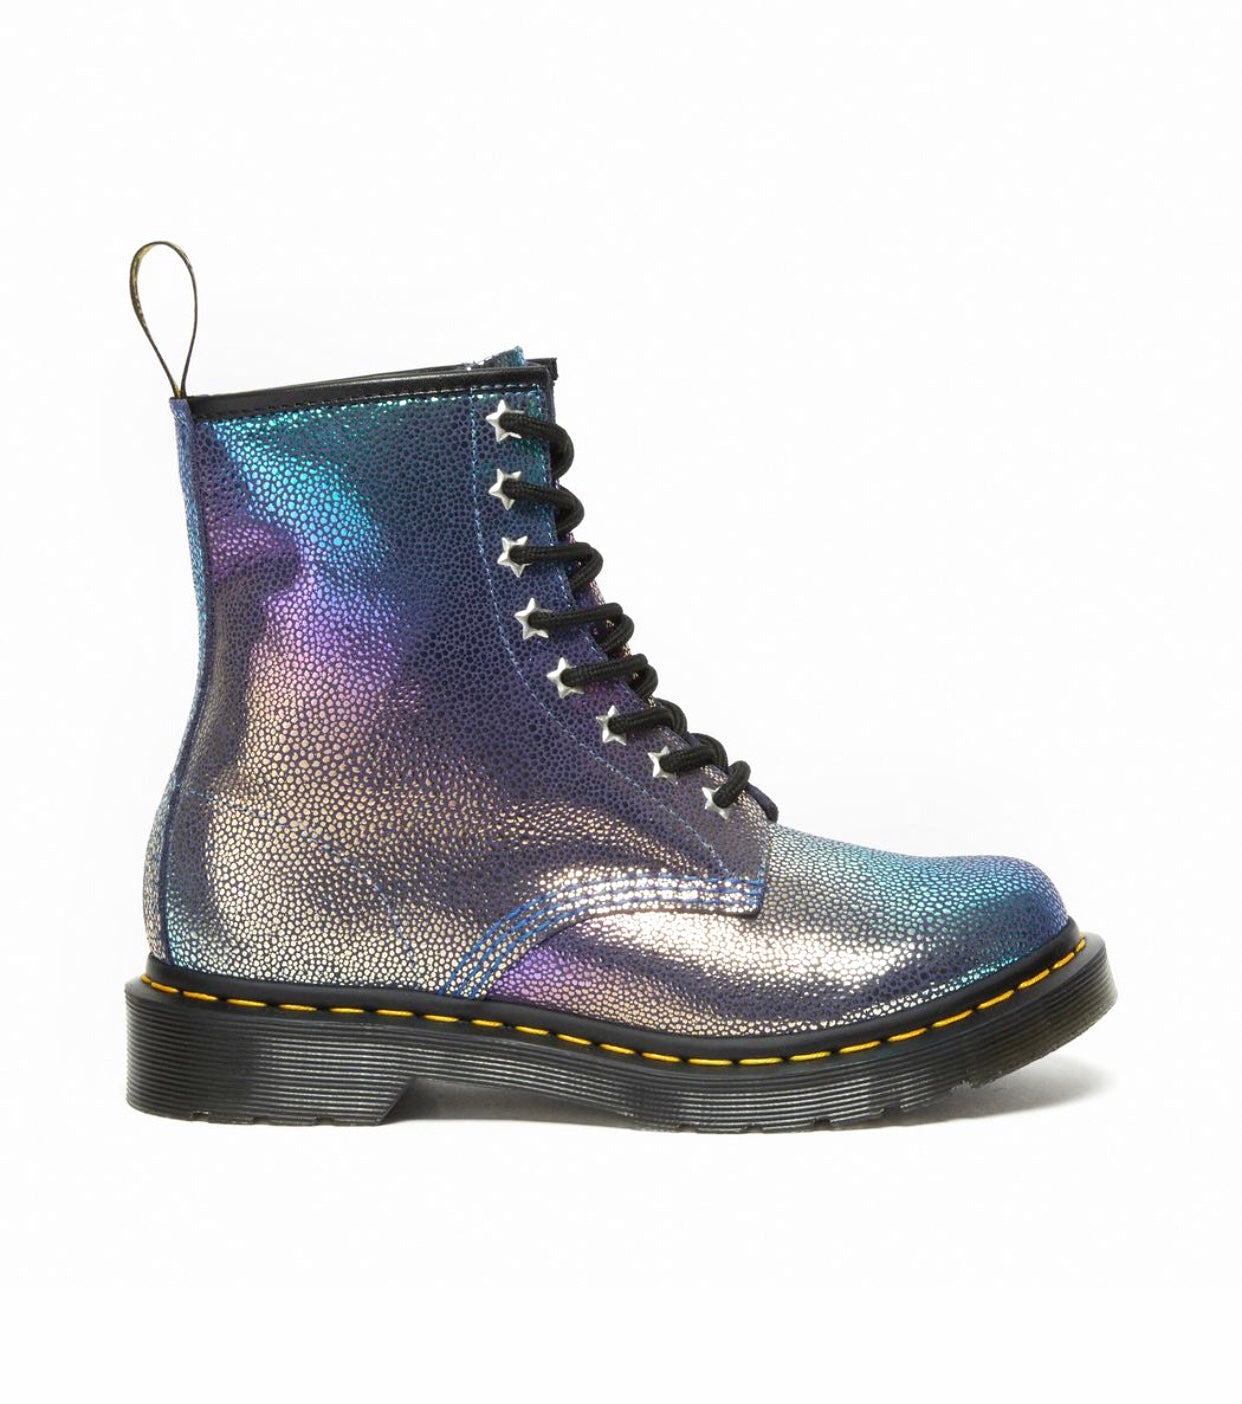 Dr. Martens 1460 Purple Rainbow Ray Ankle 8 Eyelet Boot